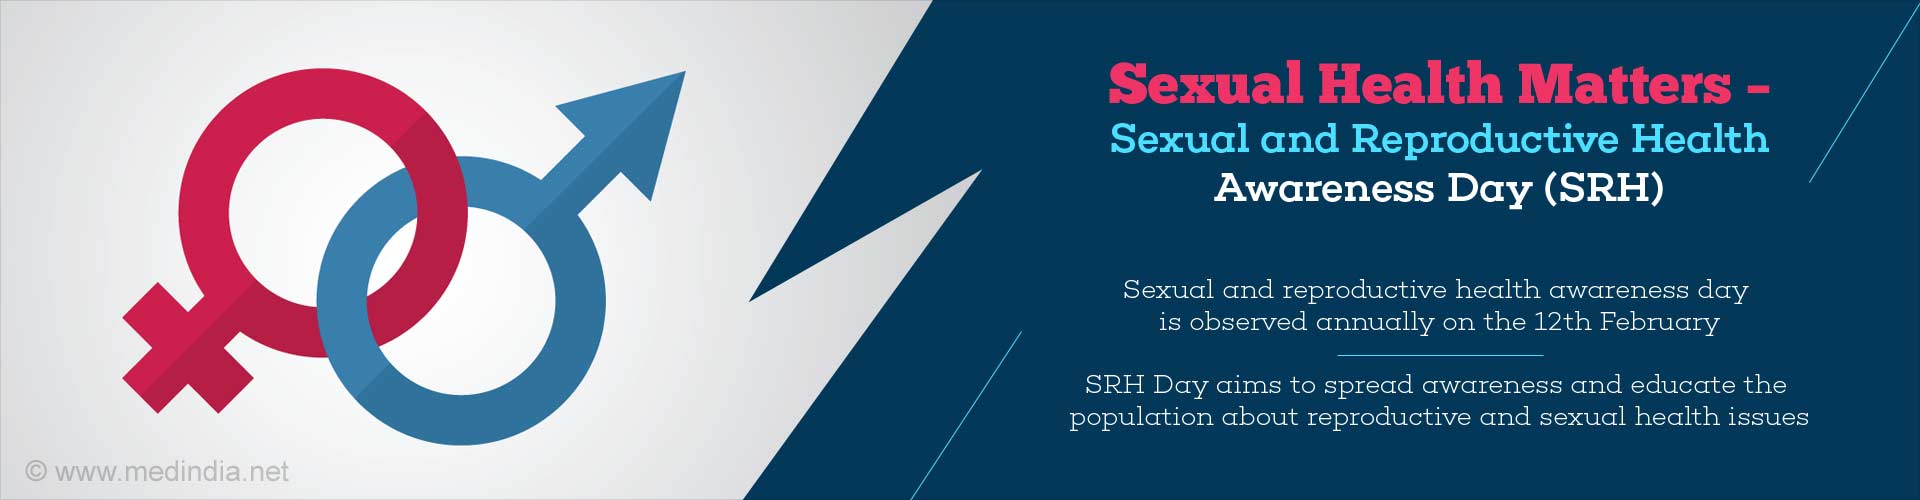 sexual health matters - sexual and reproductive health awareness day (SRH)
- sexual and reproductive health awareness day is observed annually on 12th February
- SRH day aims to spread awareness and educate the population about reproductive ans sexual health issues